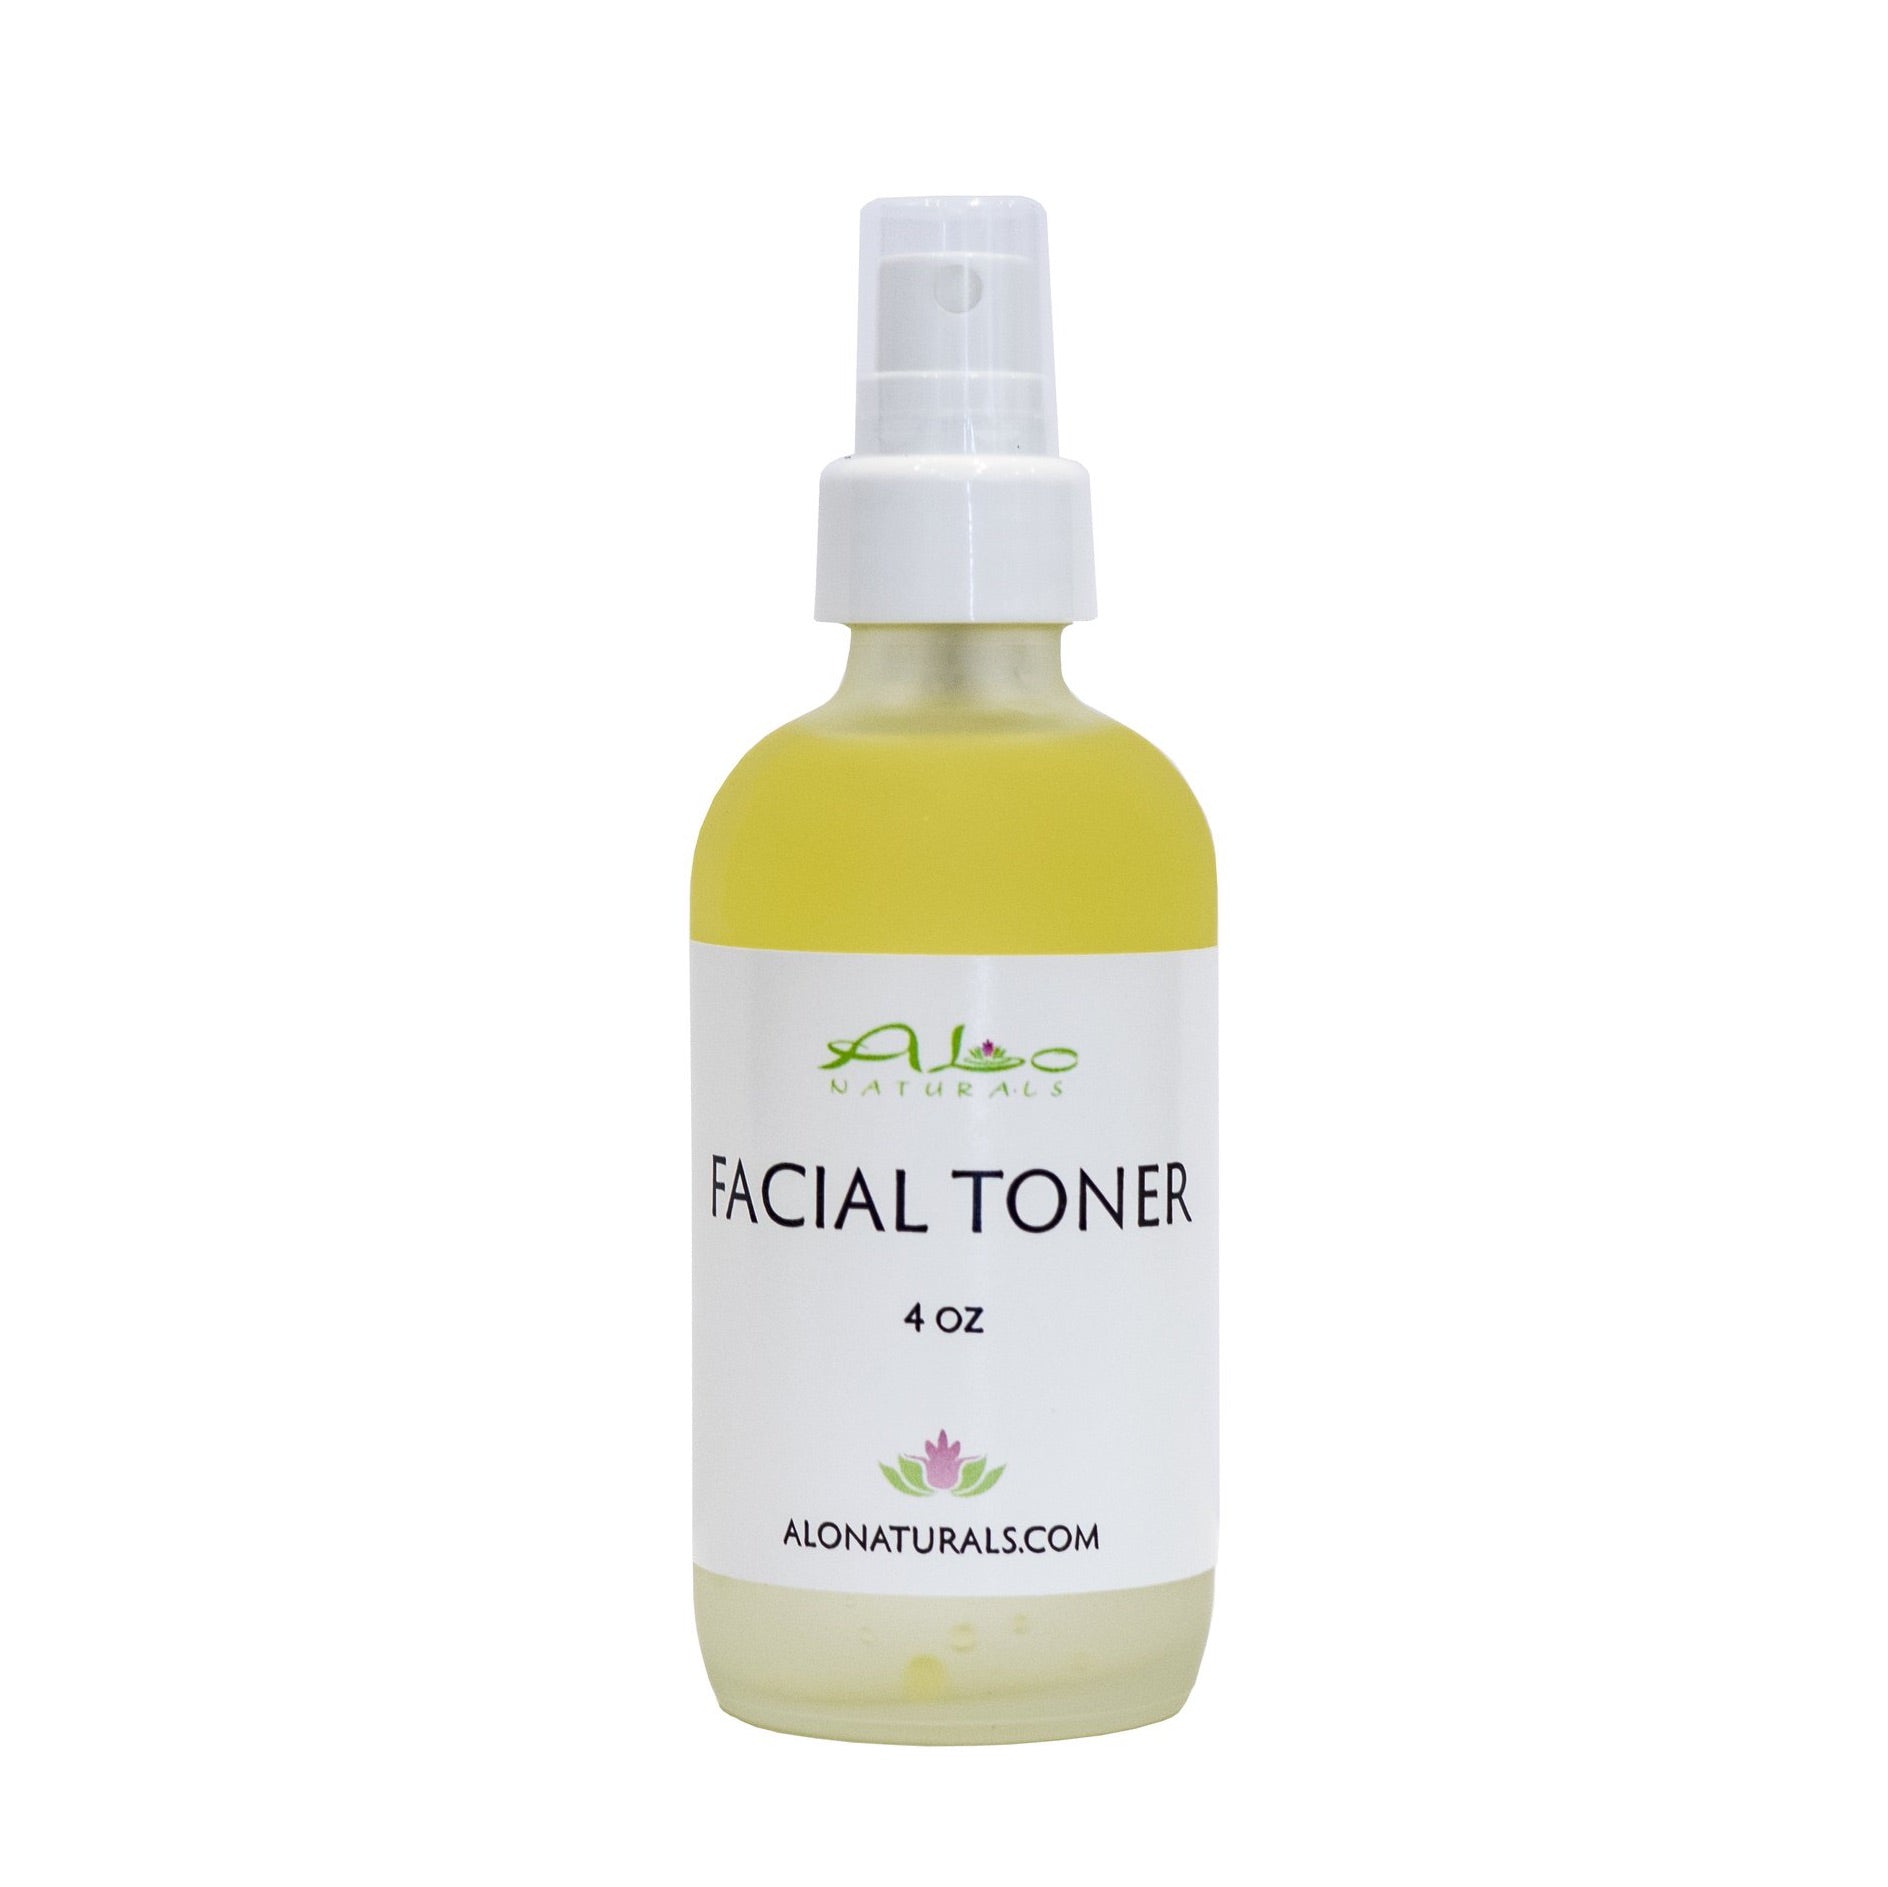 This toning mist is specially formulated as a brightening refresher to treat puffy eyes, redness, acne, scaring, weathered skin, fight the effects of aging, reduce signs of eczema, reduce oil, and seal moisture into the skin.  The mild astringent properties of the combined citrus fruit help to minimize the appearance of pores, lock in moisture, and leave your face looking fresh and revitalized.  This gentle formula is suitable for all skin types. 4oz